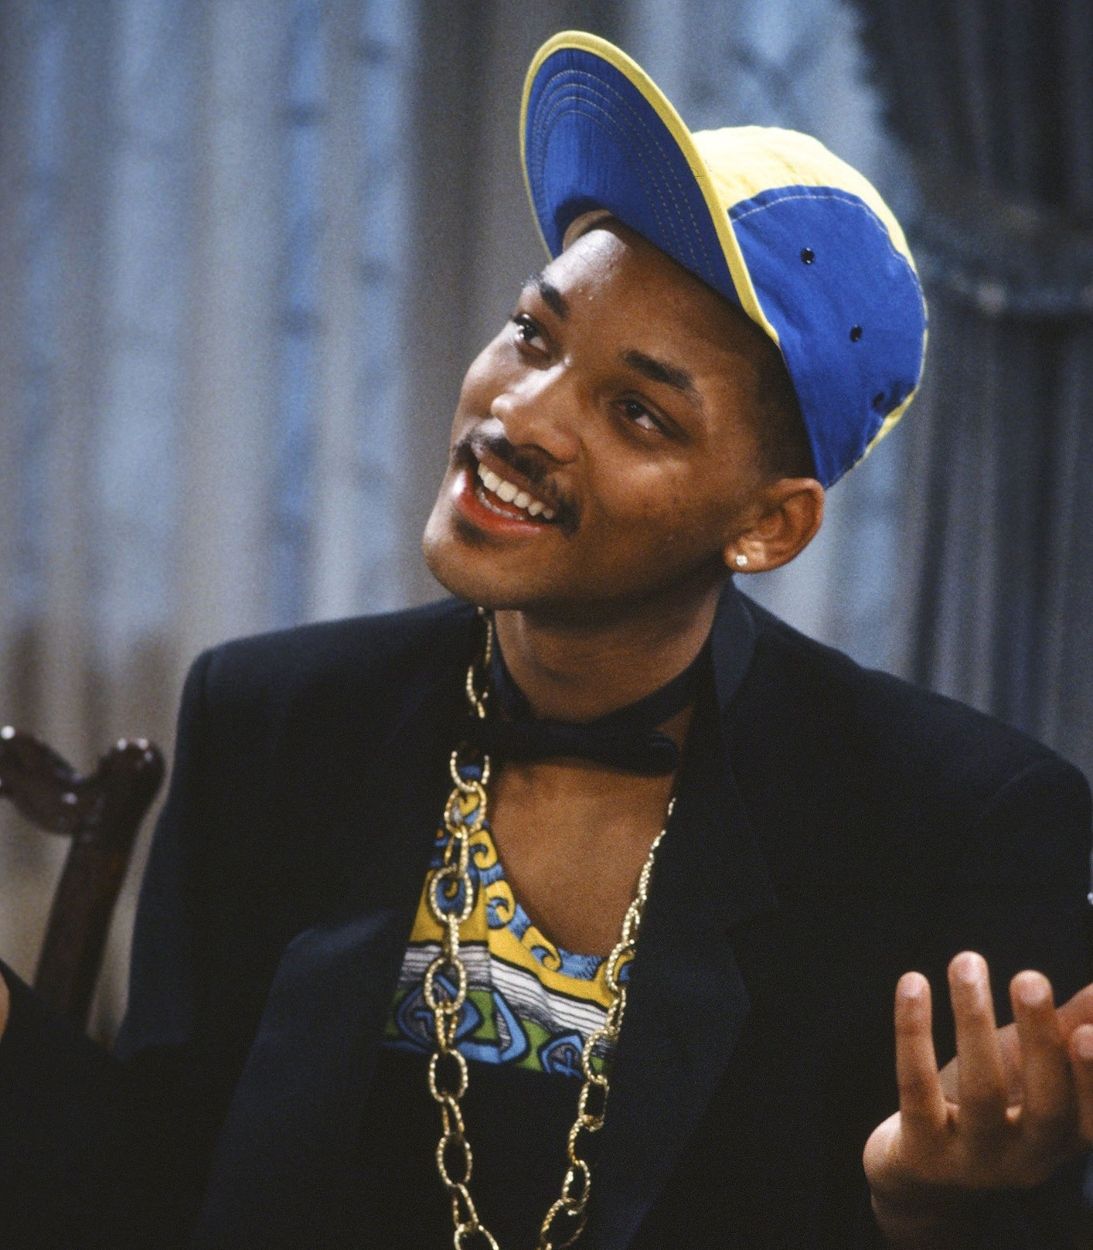 fresh prince of bel air will smith TDLR vertical